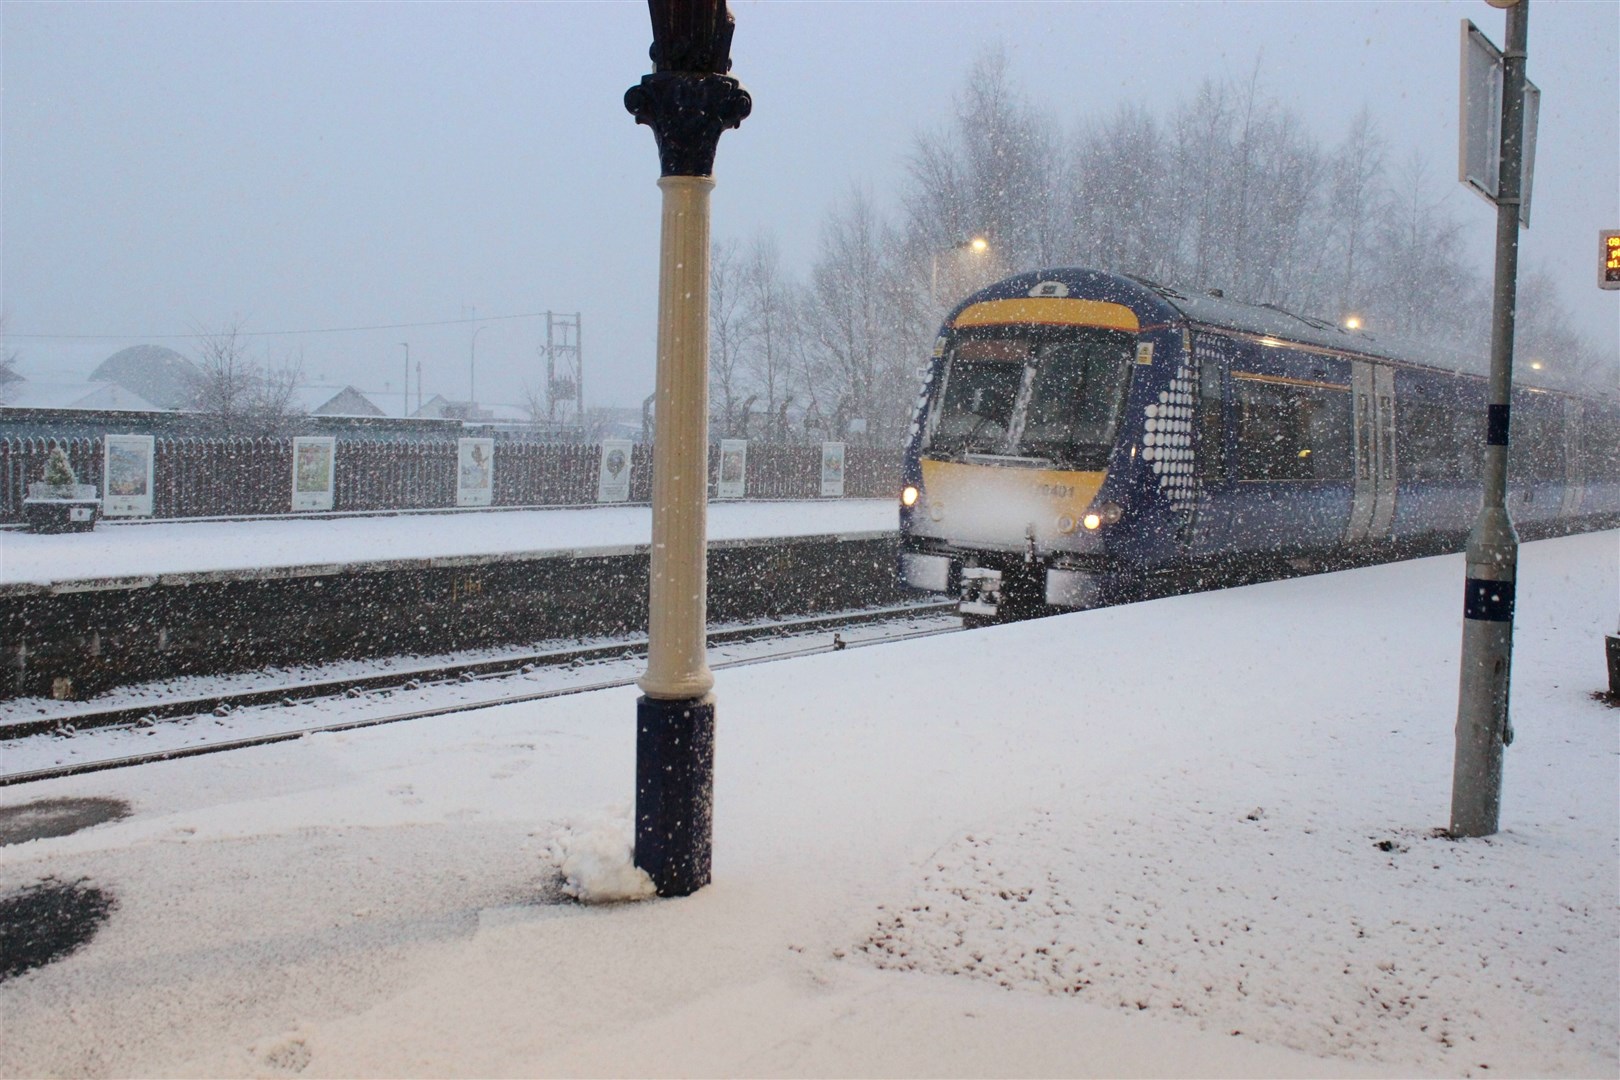 A ScotRail train at Kingussie station in the snow last winter.